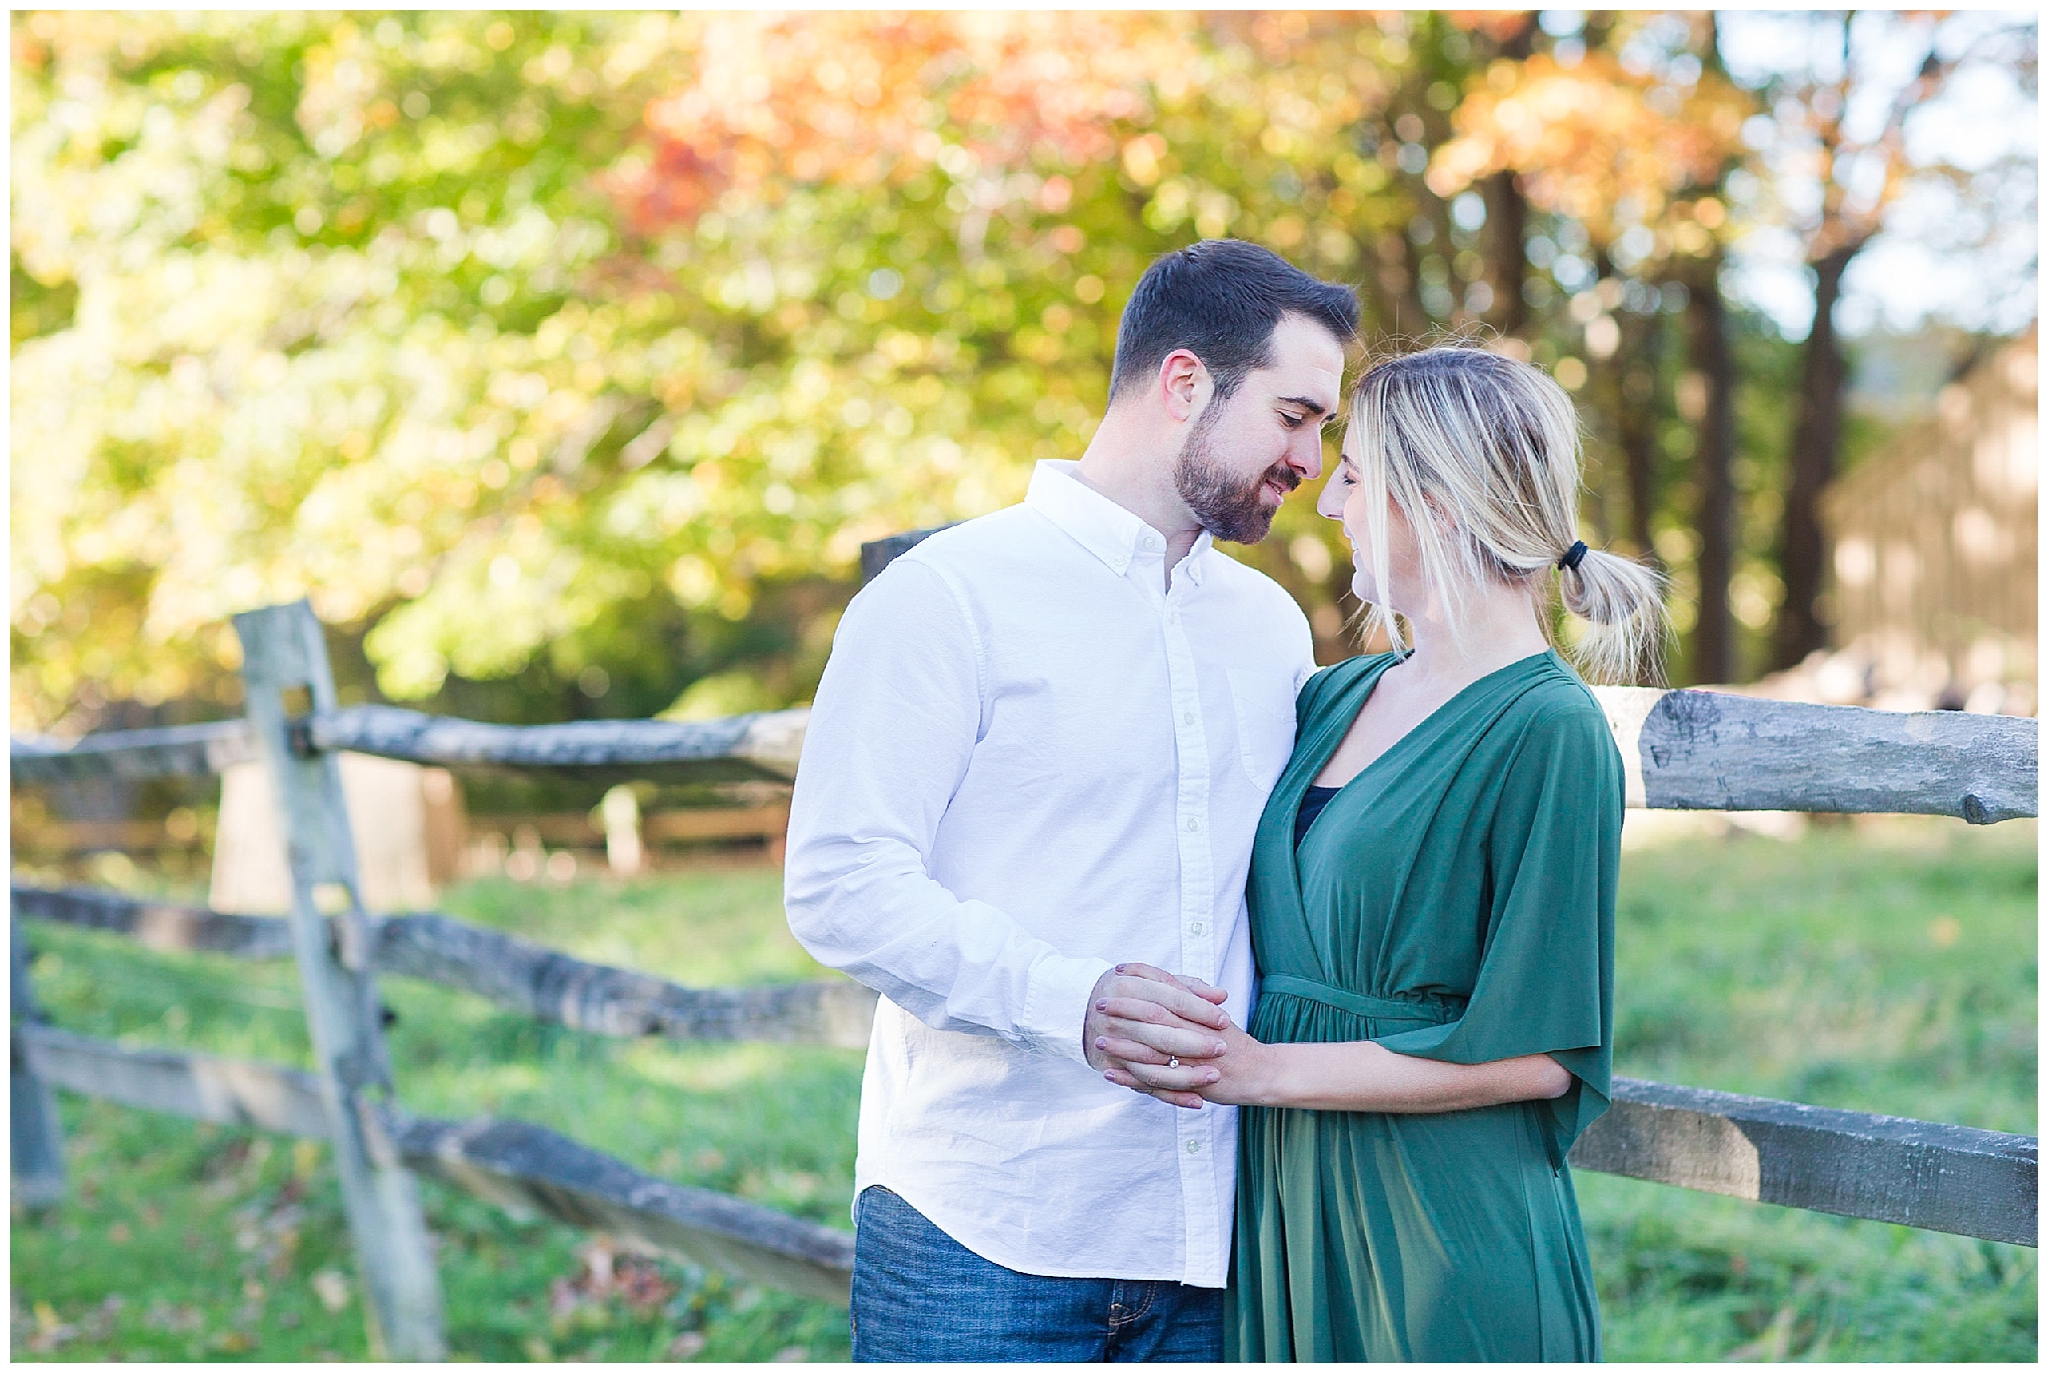 Christina + Chad | Fall Engagement featuring Ludo